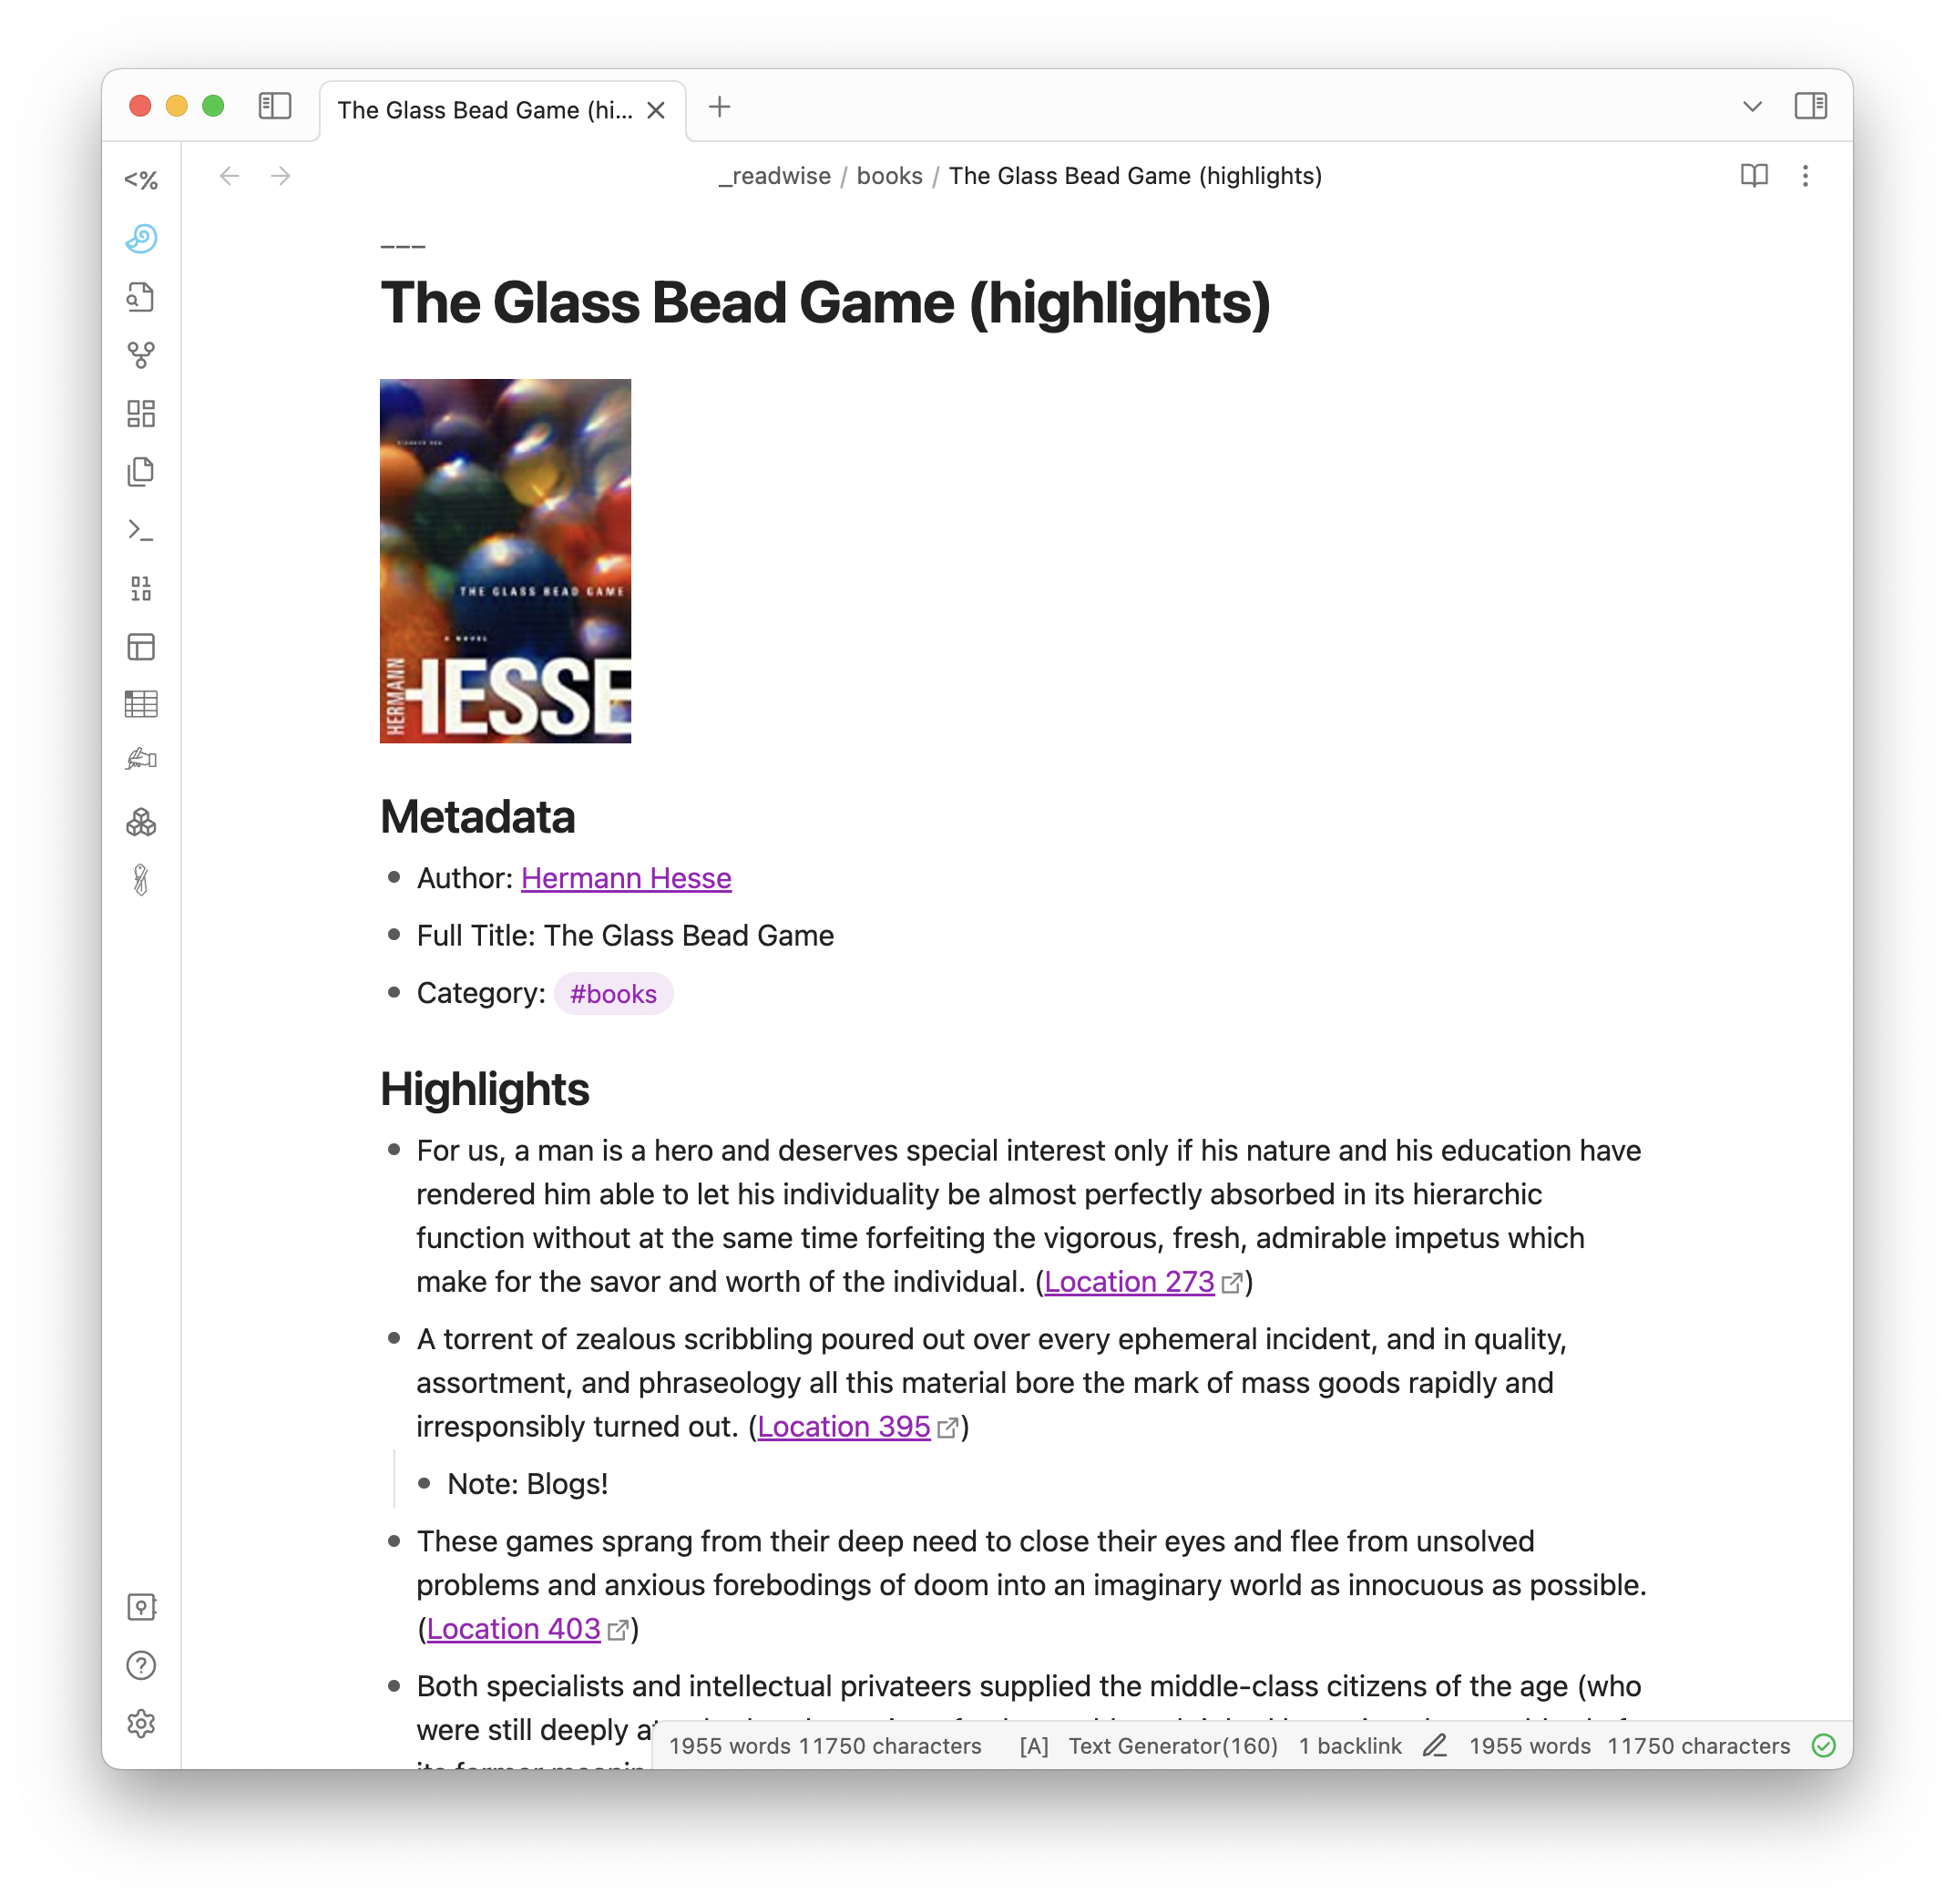 Screenshot of an Obsidian window showing kindle highlights from the novel 'The Glass Bead Game.'